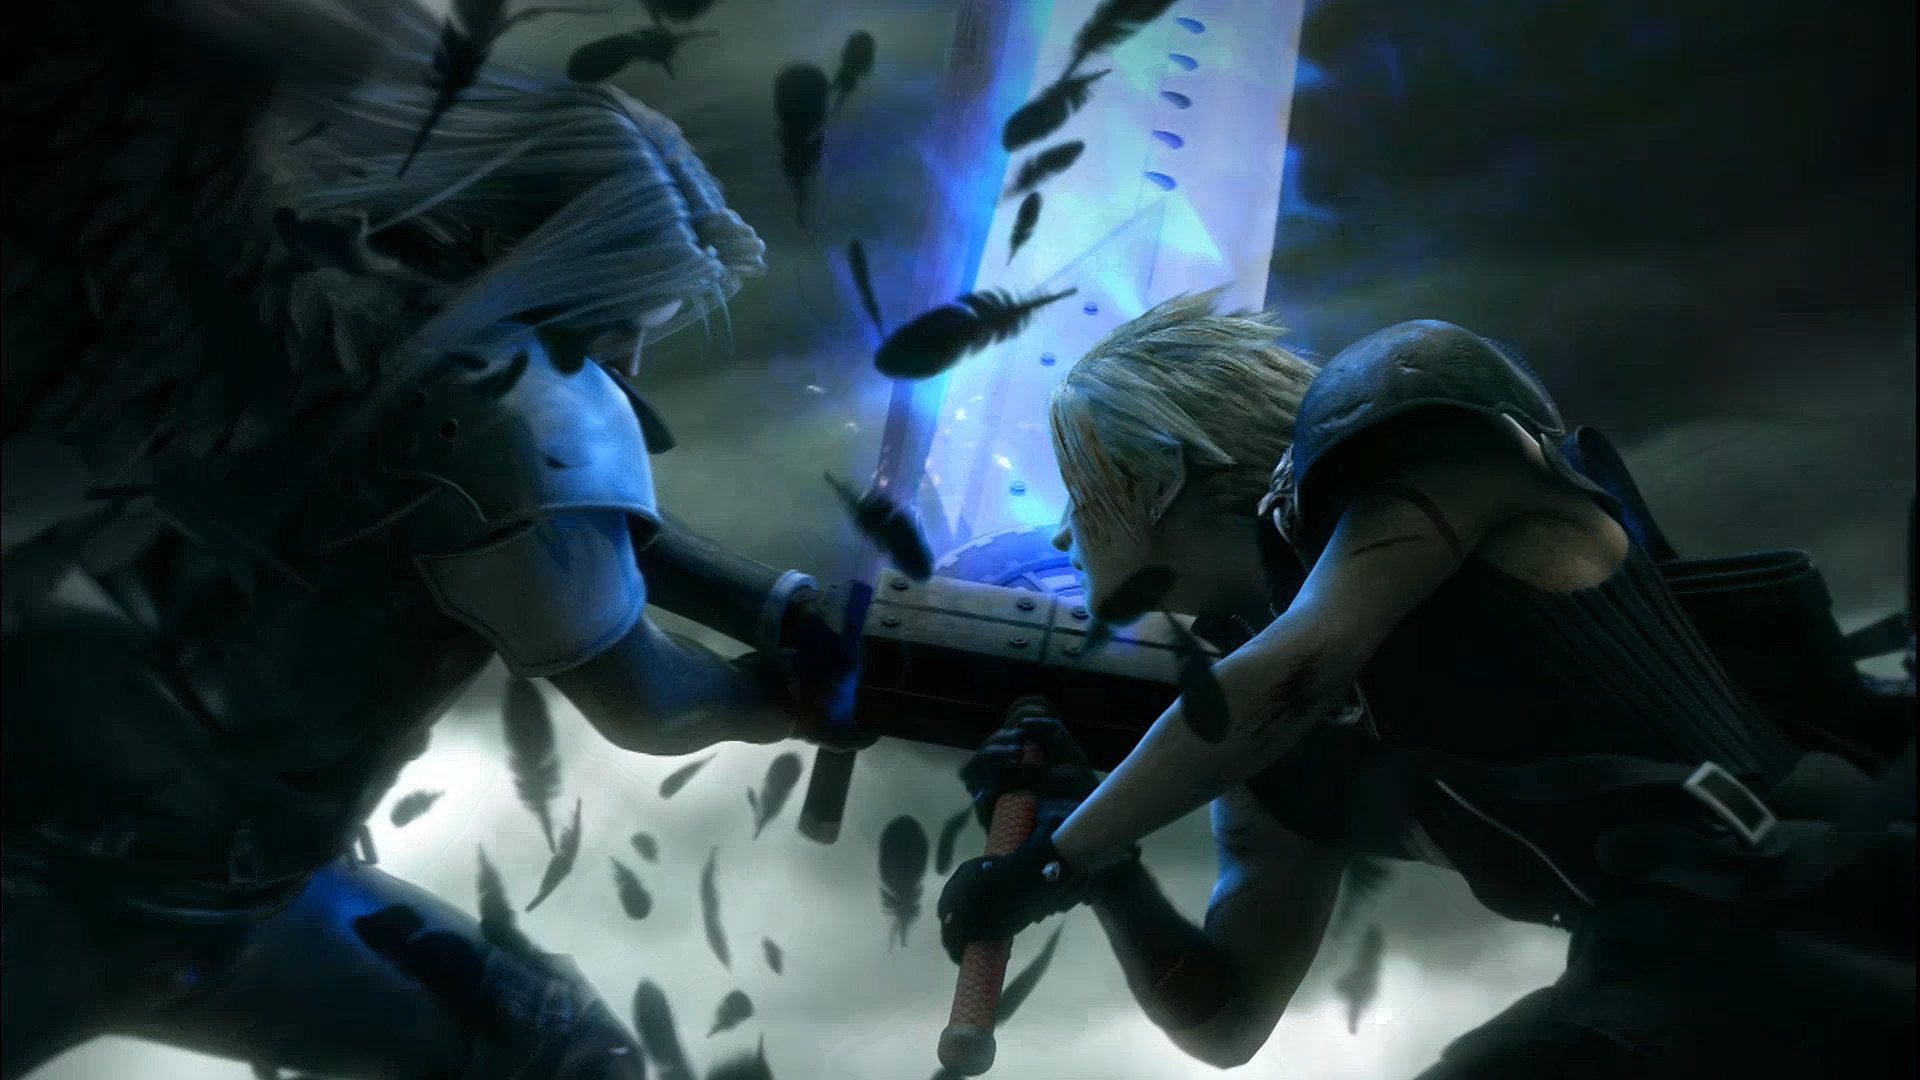 Cloud Strife and Sephiroth from Final Fantasy VII: Advent Children in an animated scene.